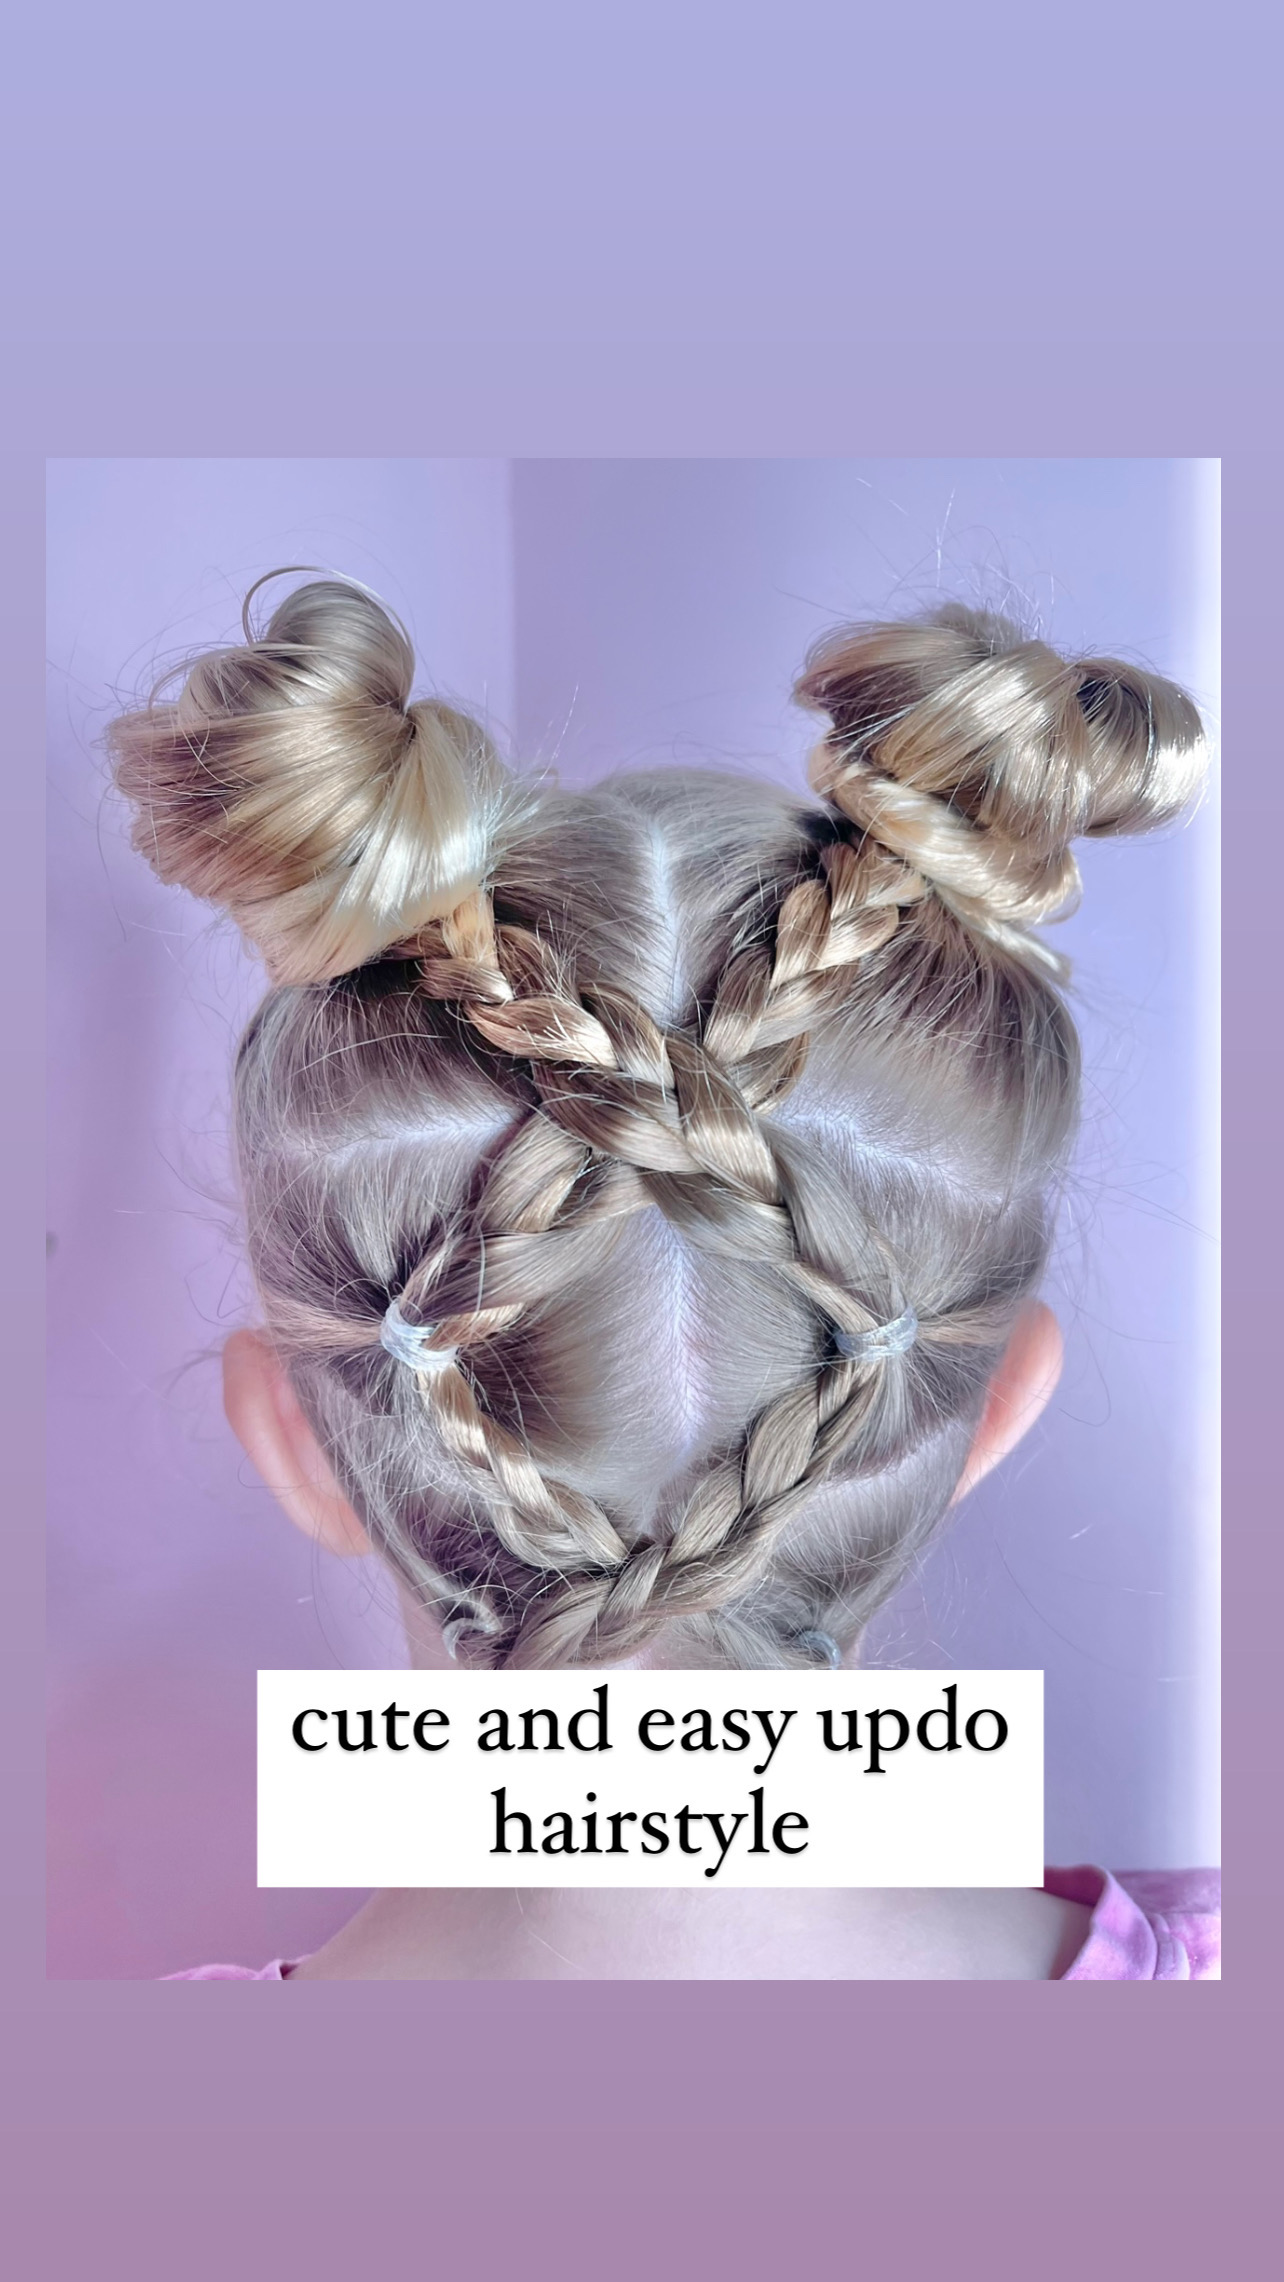 6 Cute Hairstyles for Short Hair | The Muse